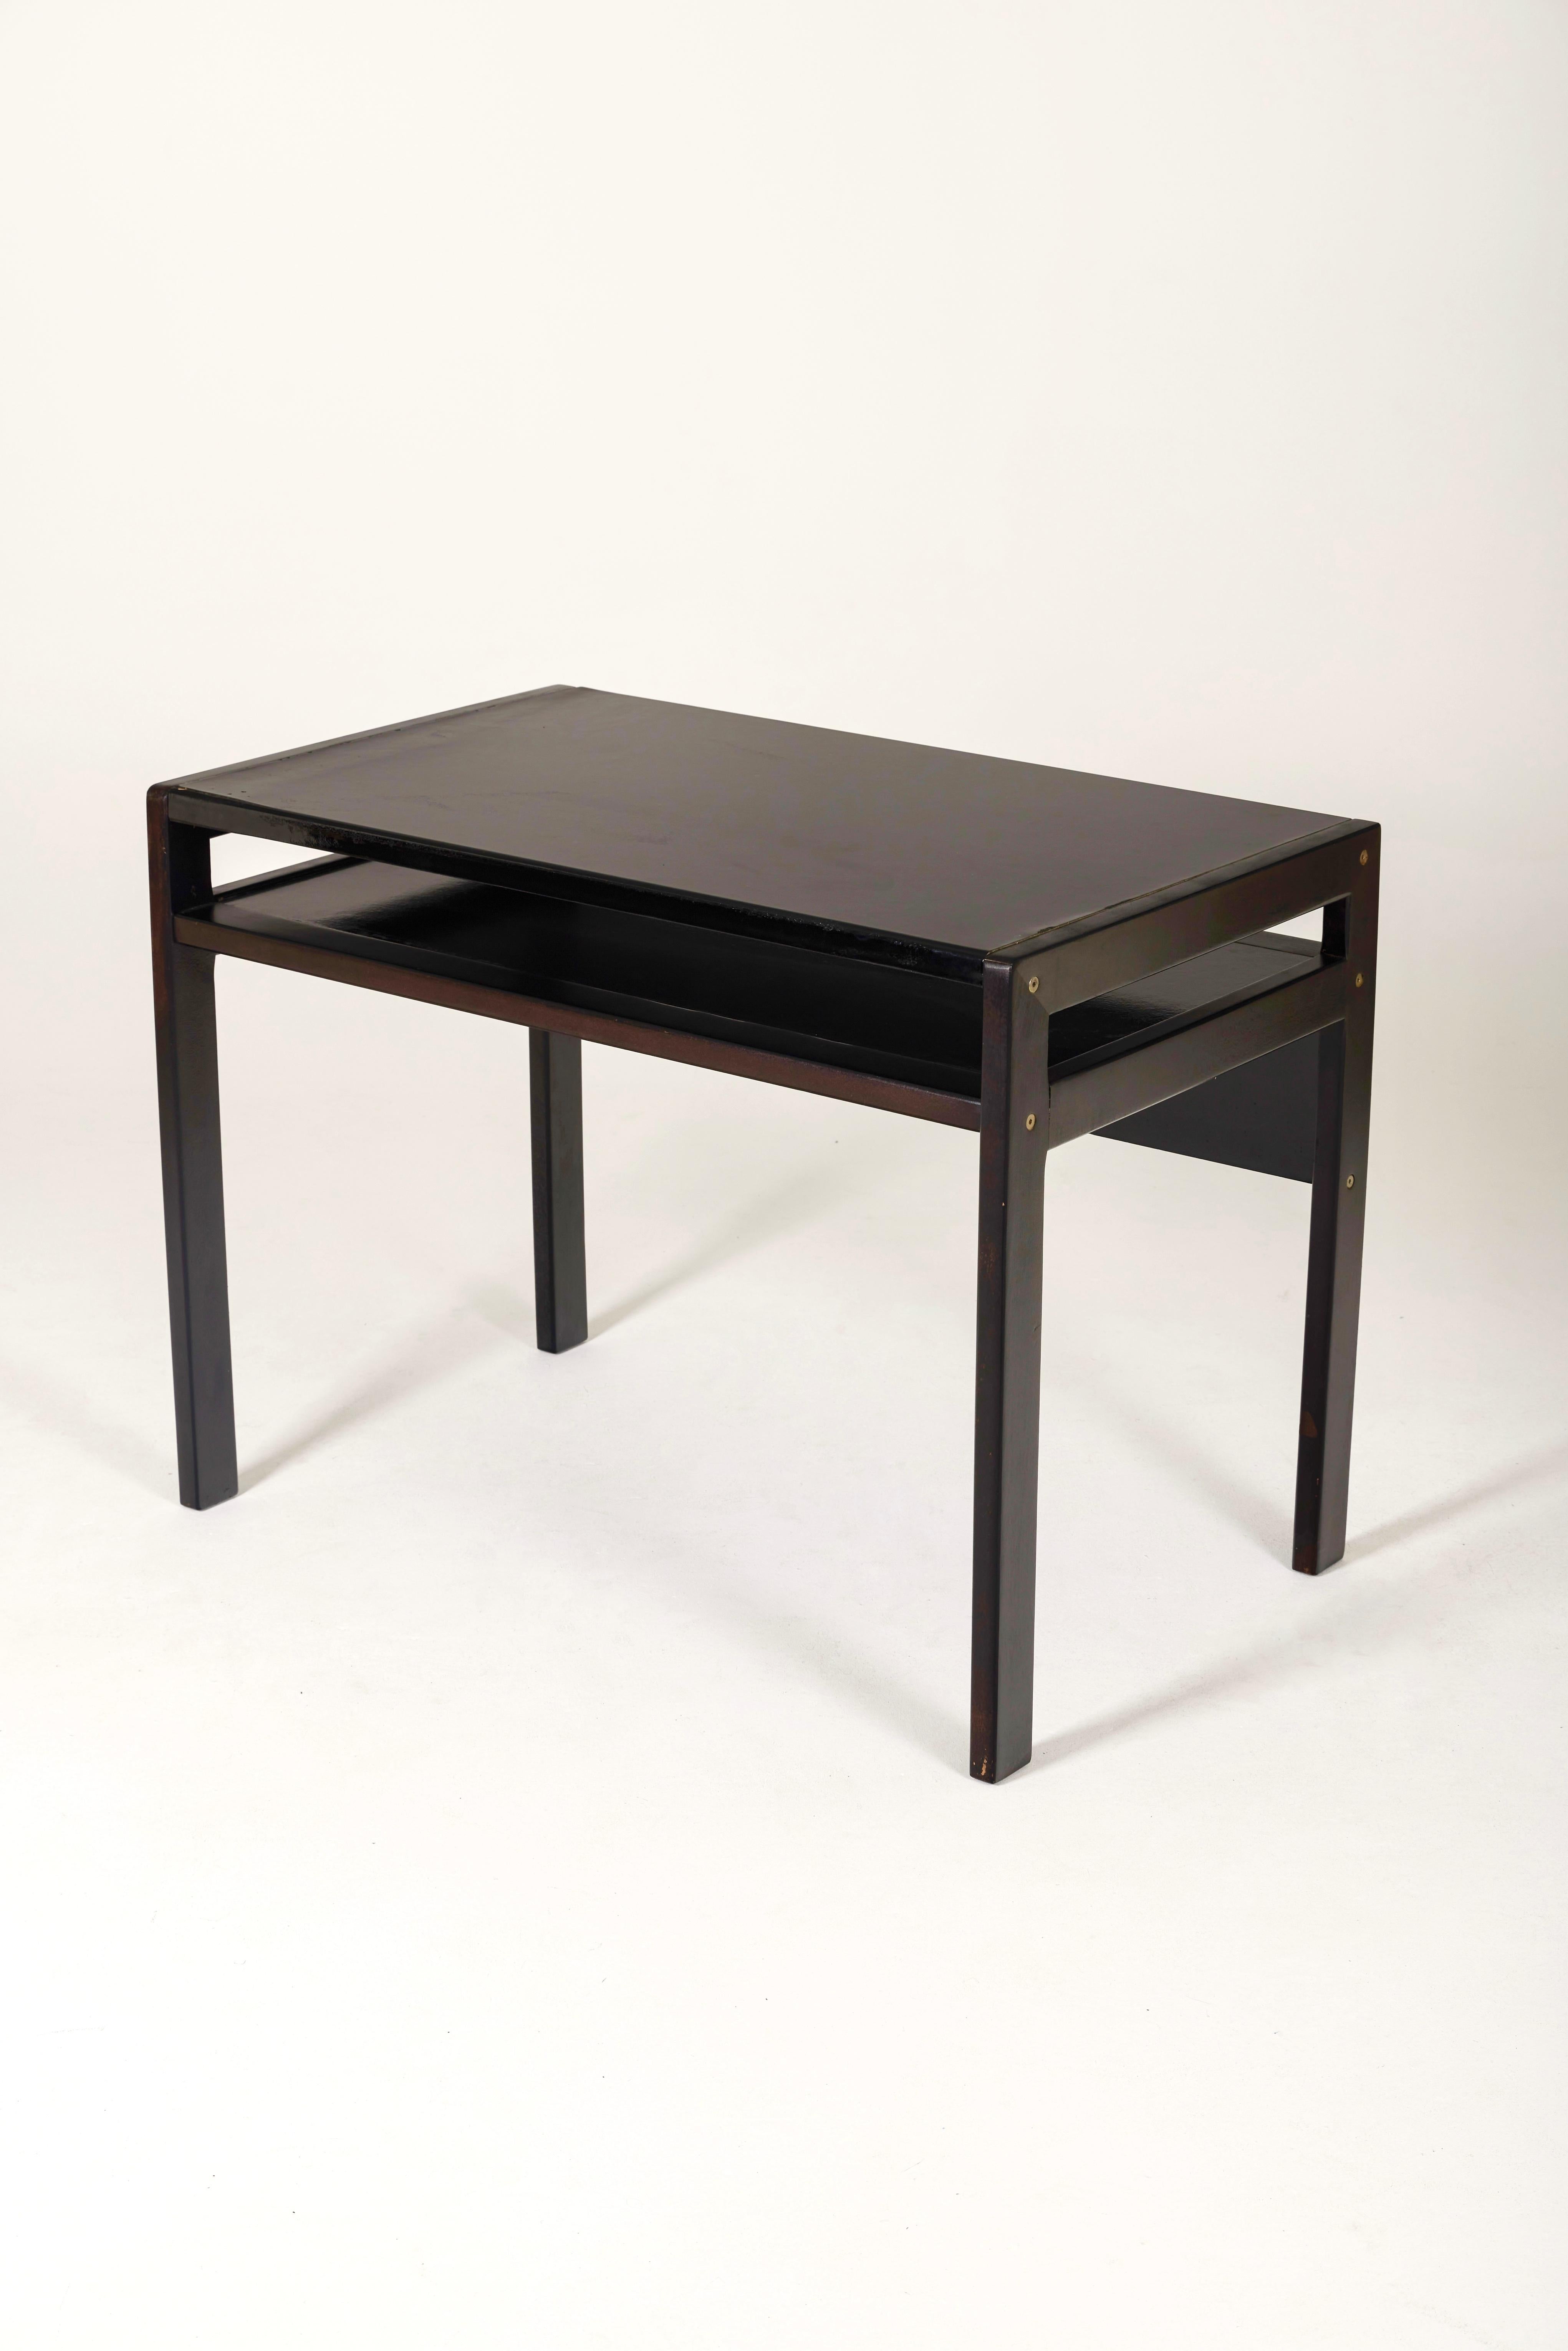 Desk by Lyon designer André Sornay from the 1960s. The structure and top are in black lacquered wood. Traces of wear are to be noted, it has been relacquered. This desk with pure, geometric lines and harmonious proportions will go well with